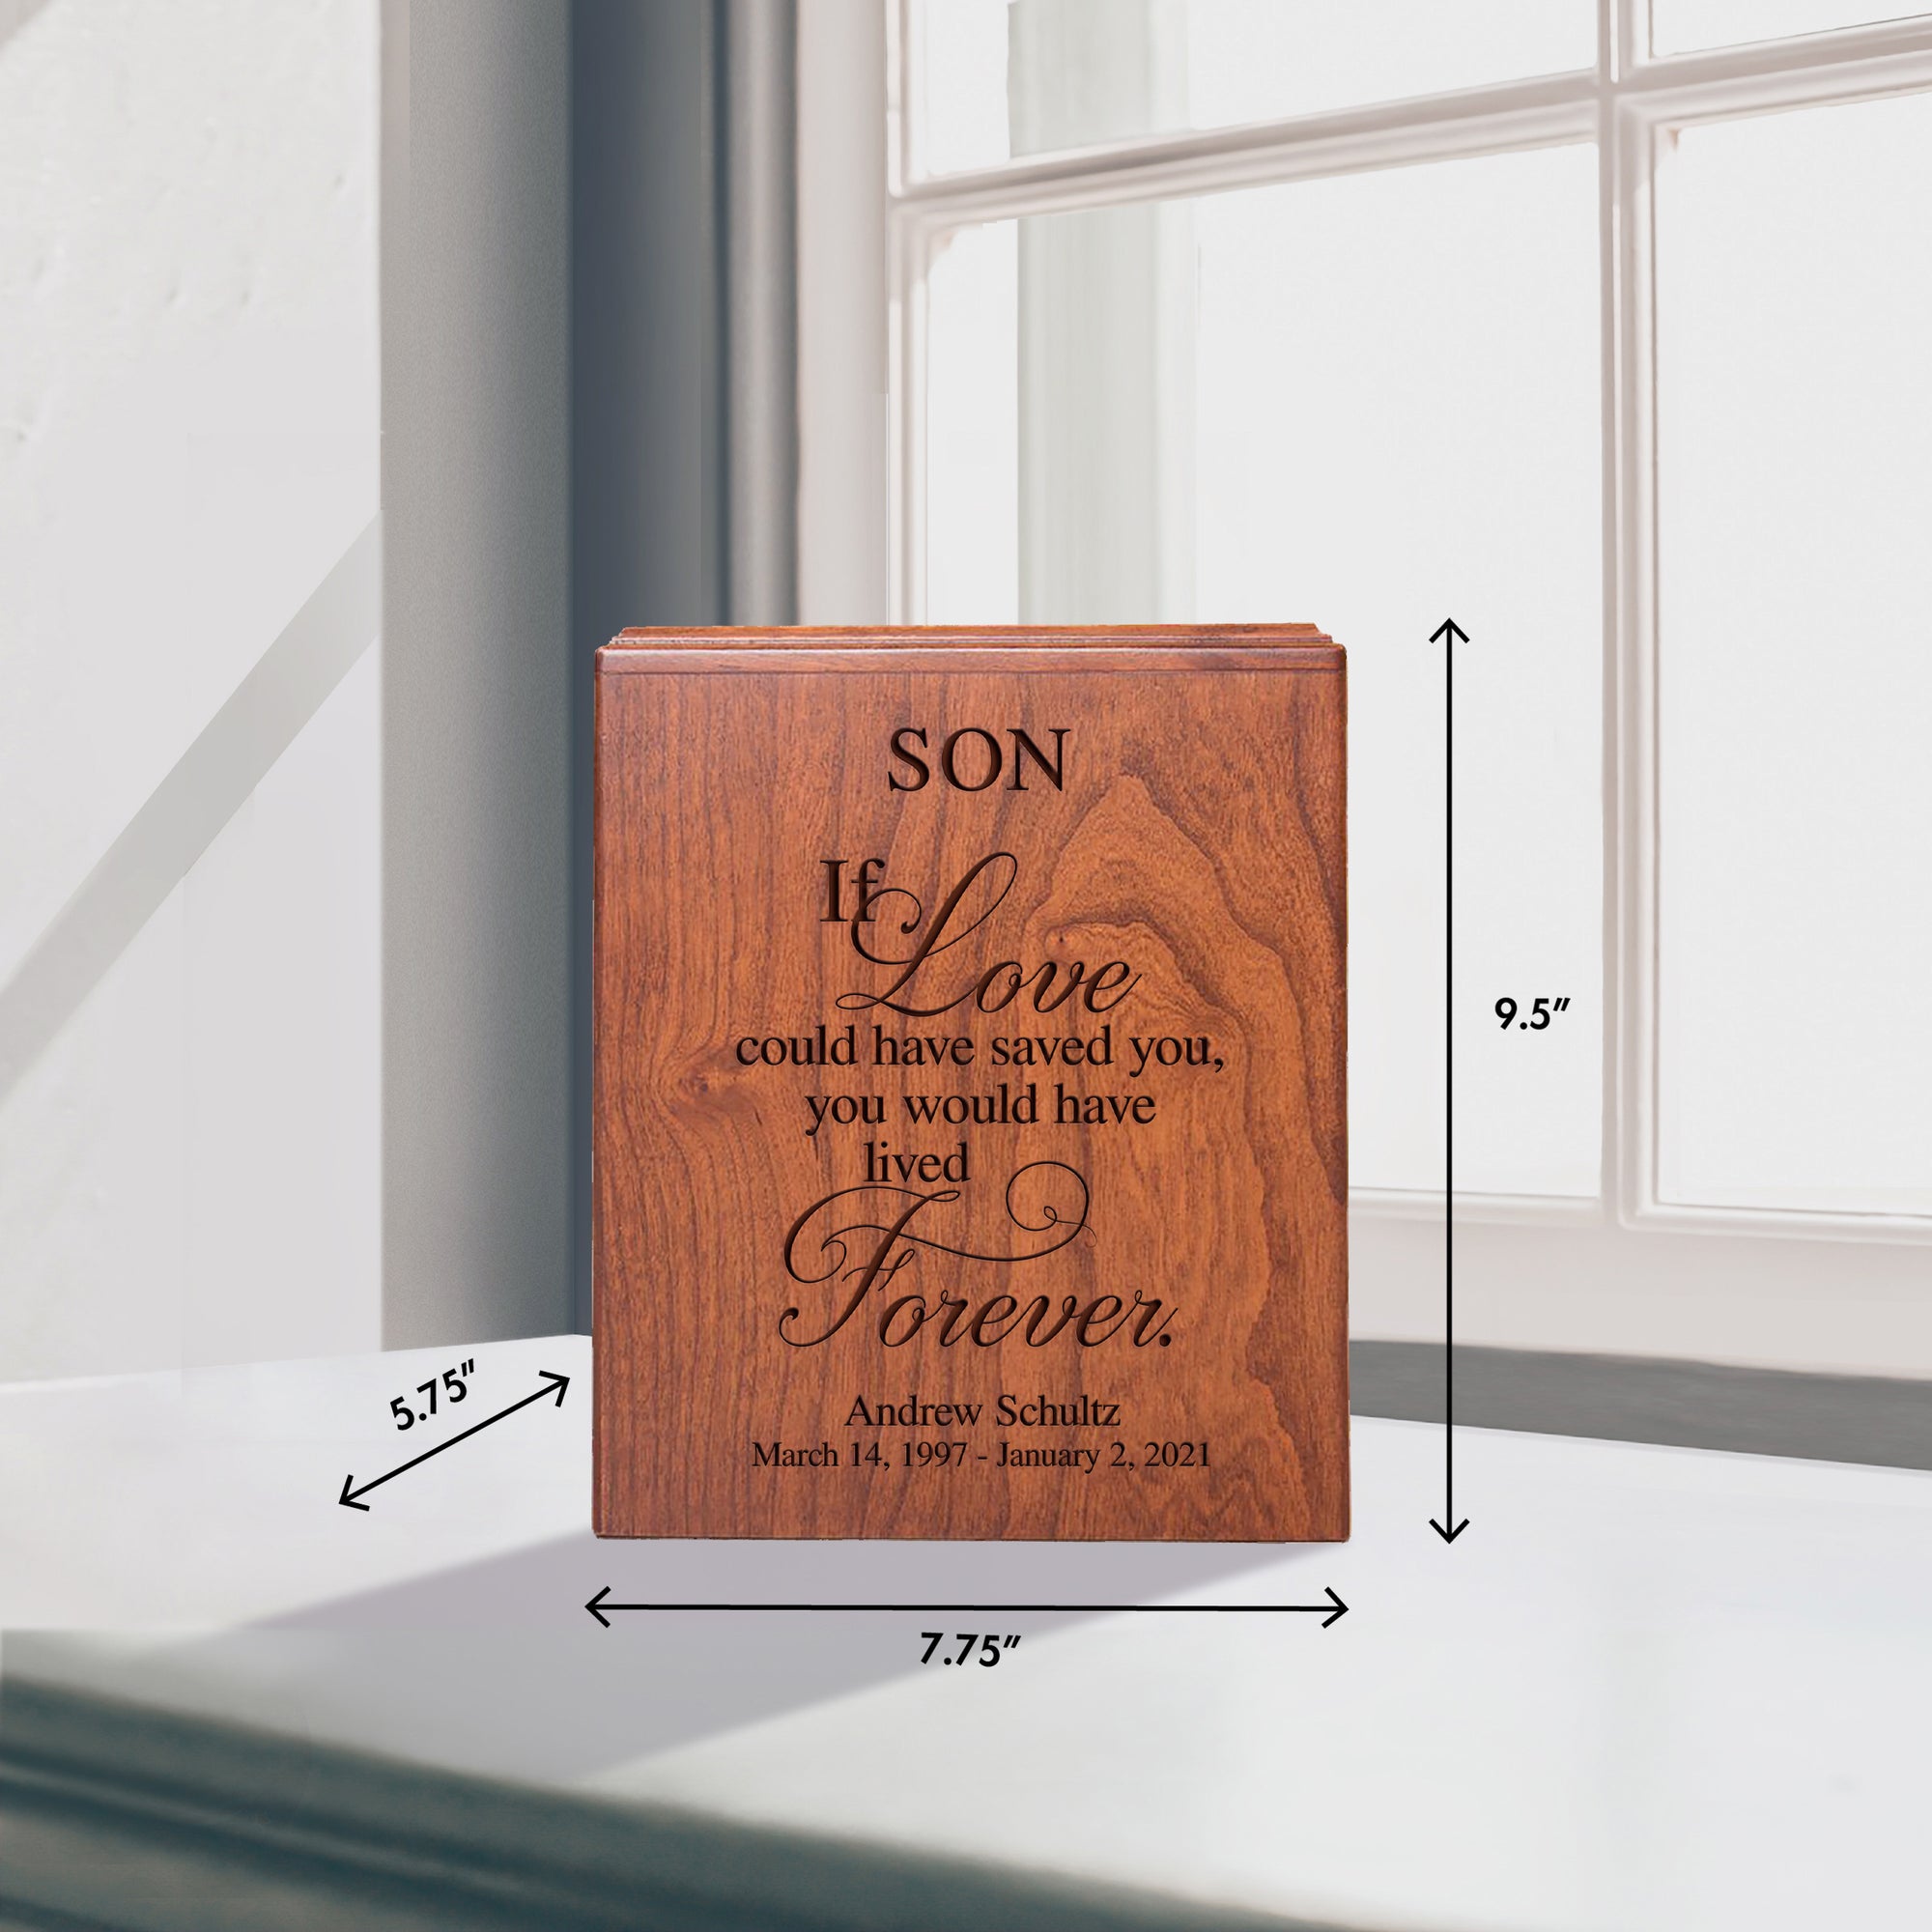 Custom Medium Wooden Cremation Urn Box for Human Ashes holds 280 cu in If Love Could